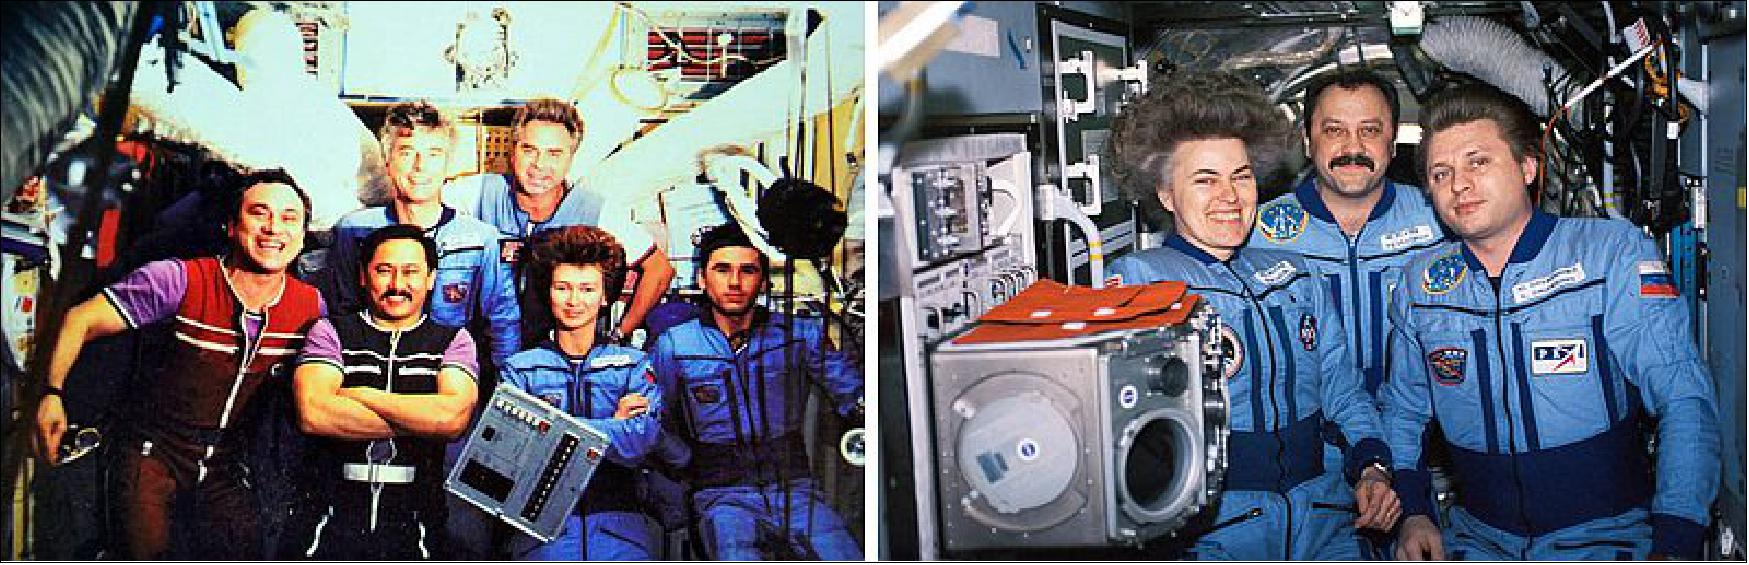 Figure 95: Left: Kondakova (second from right) aboard Mir during the handover between Expedition 16 and 17. Right: Lucid (at left) with her Mir Expedition 21 crewmates (image credit: NASA/JSC)